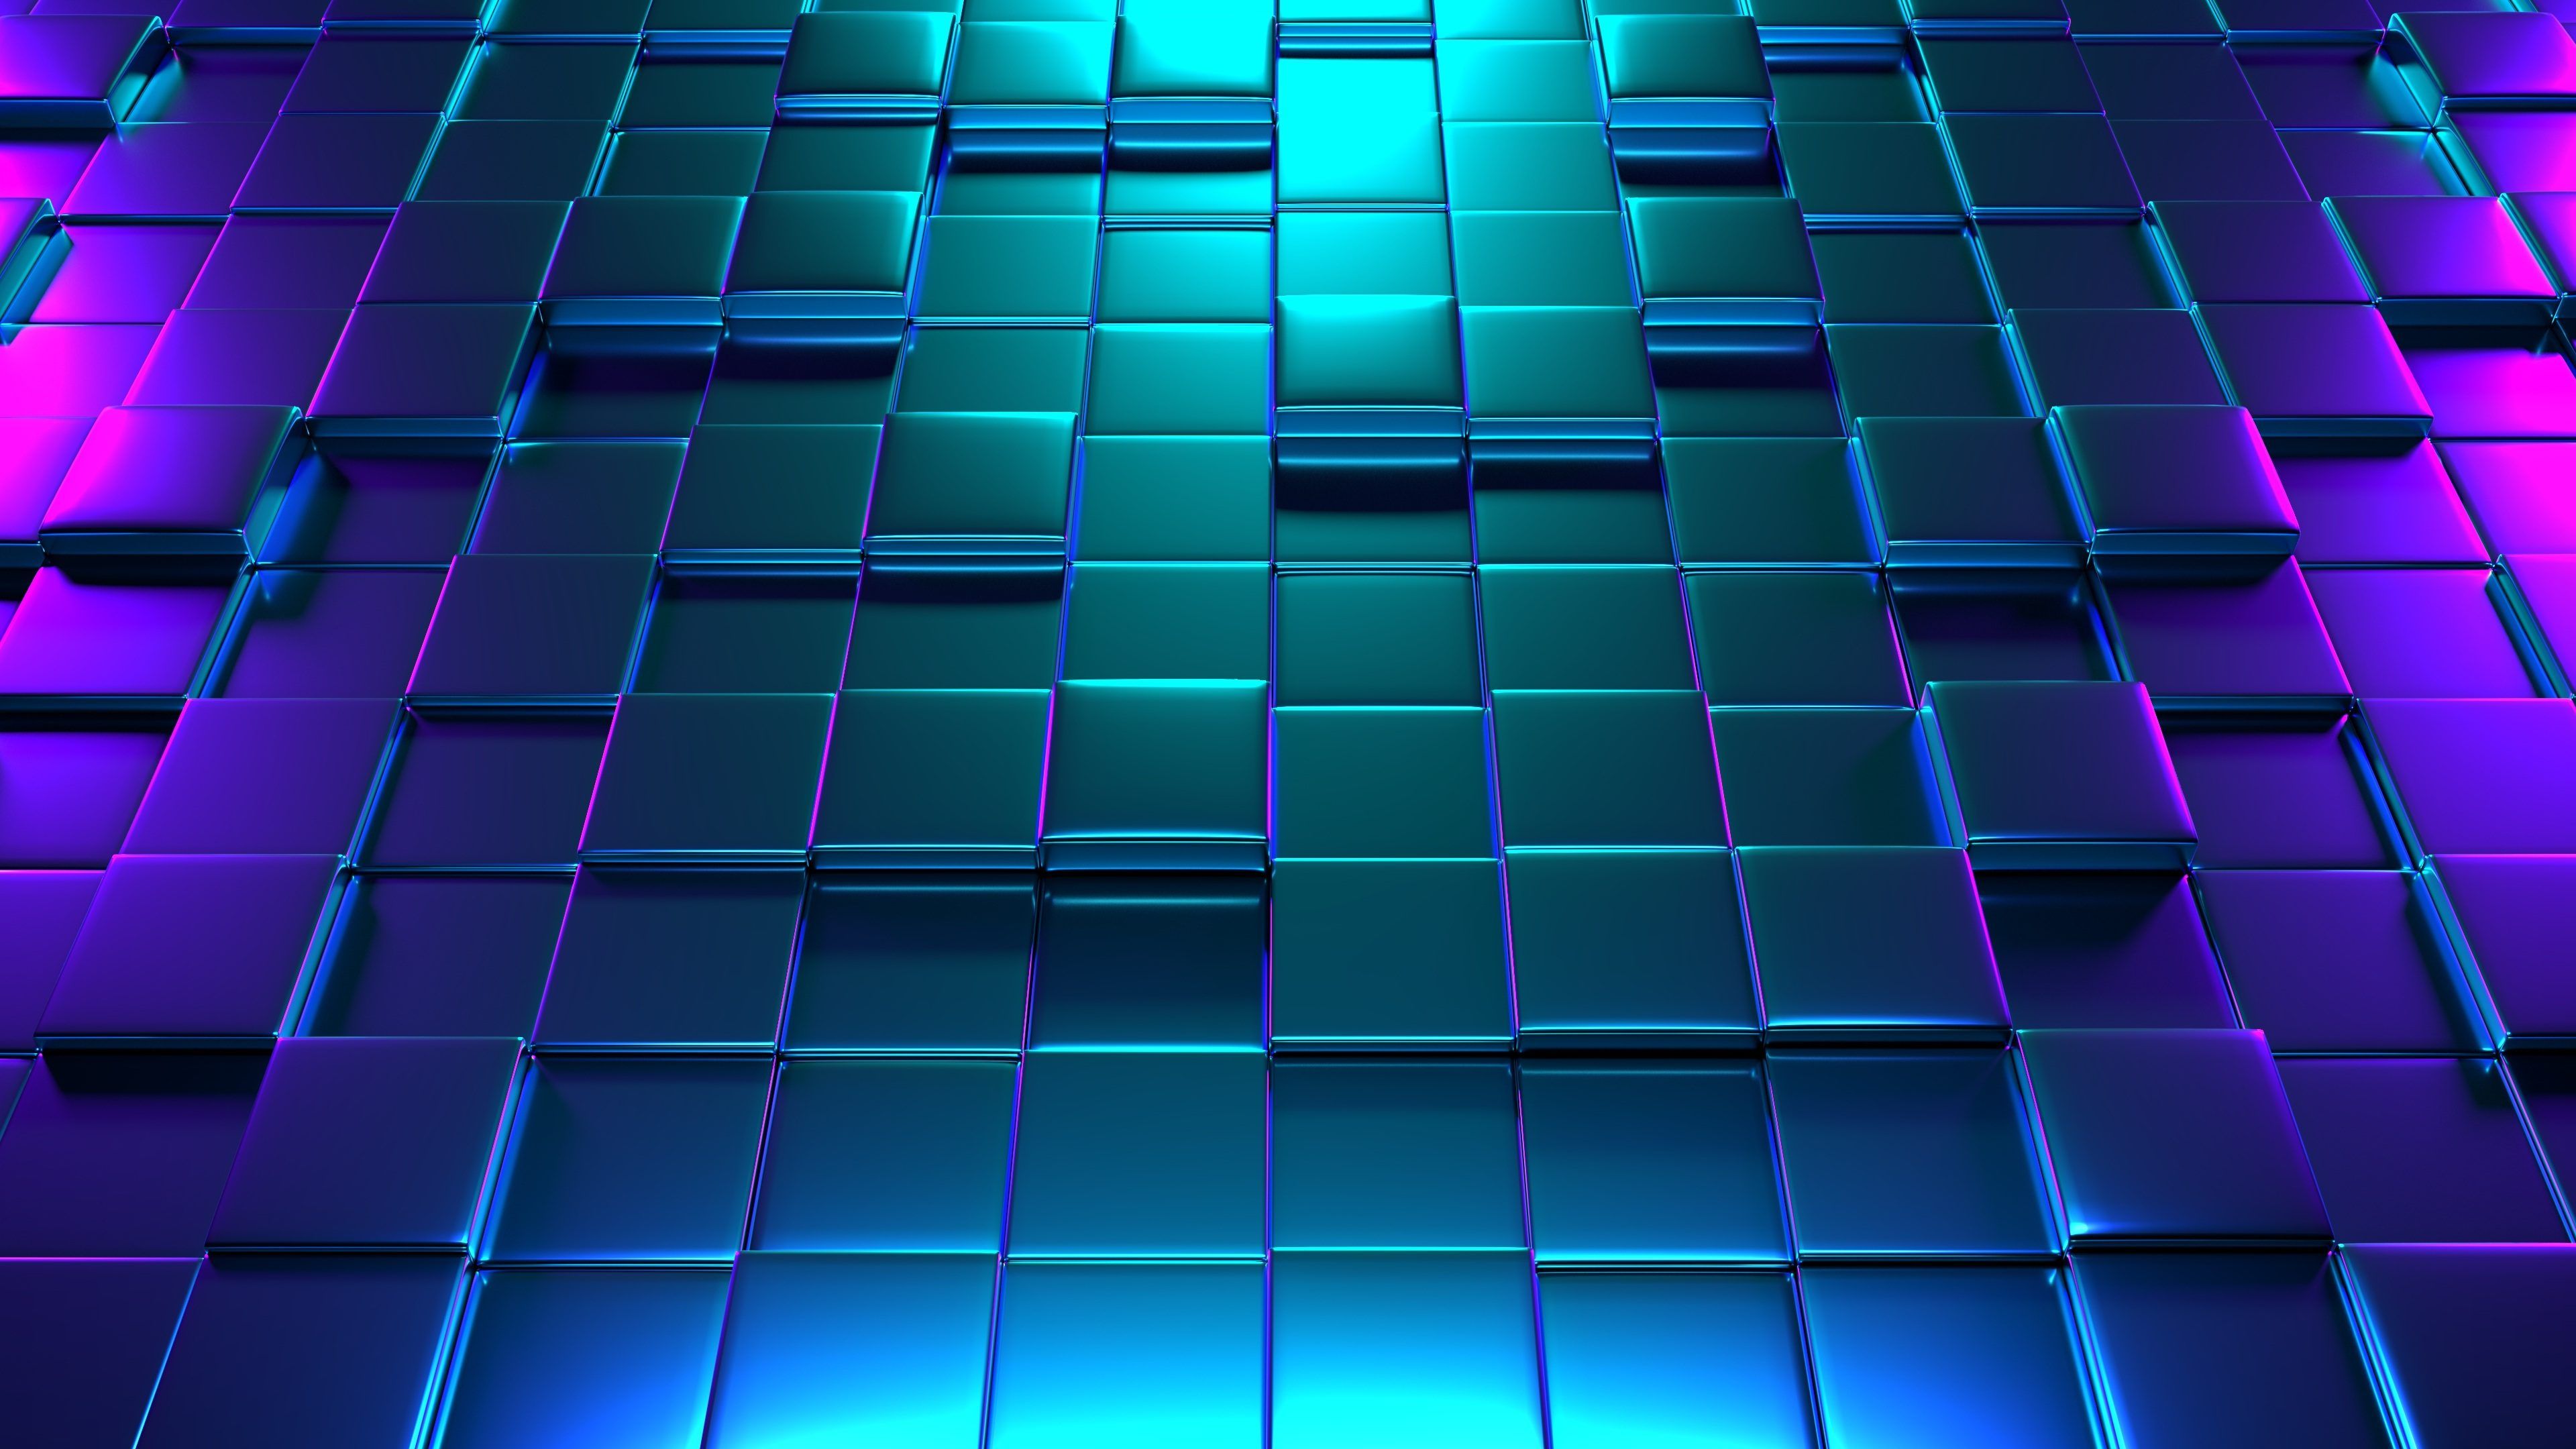 Blue And Purple Abstract Wallpaper On